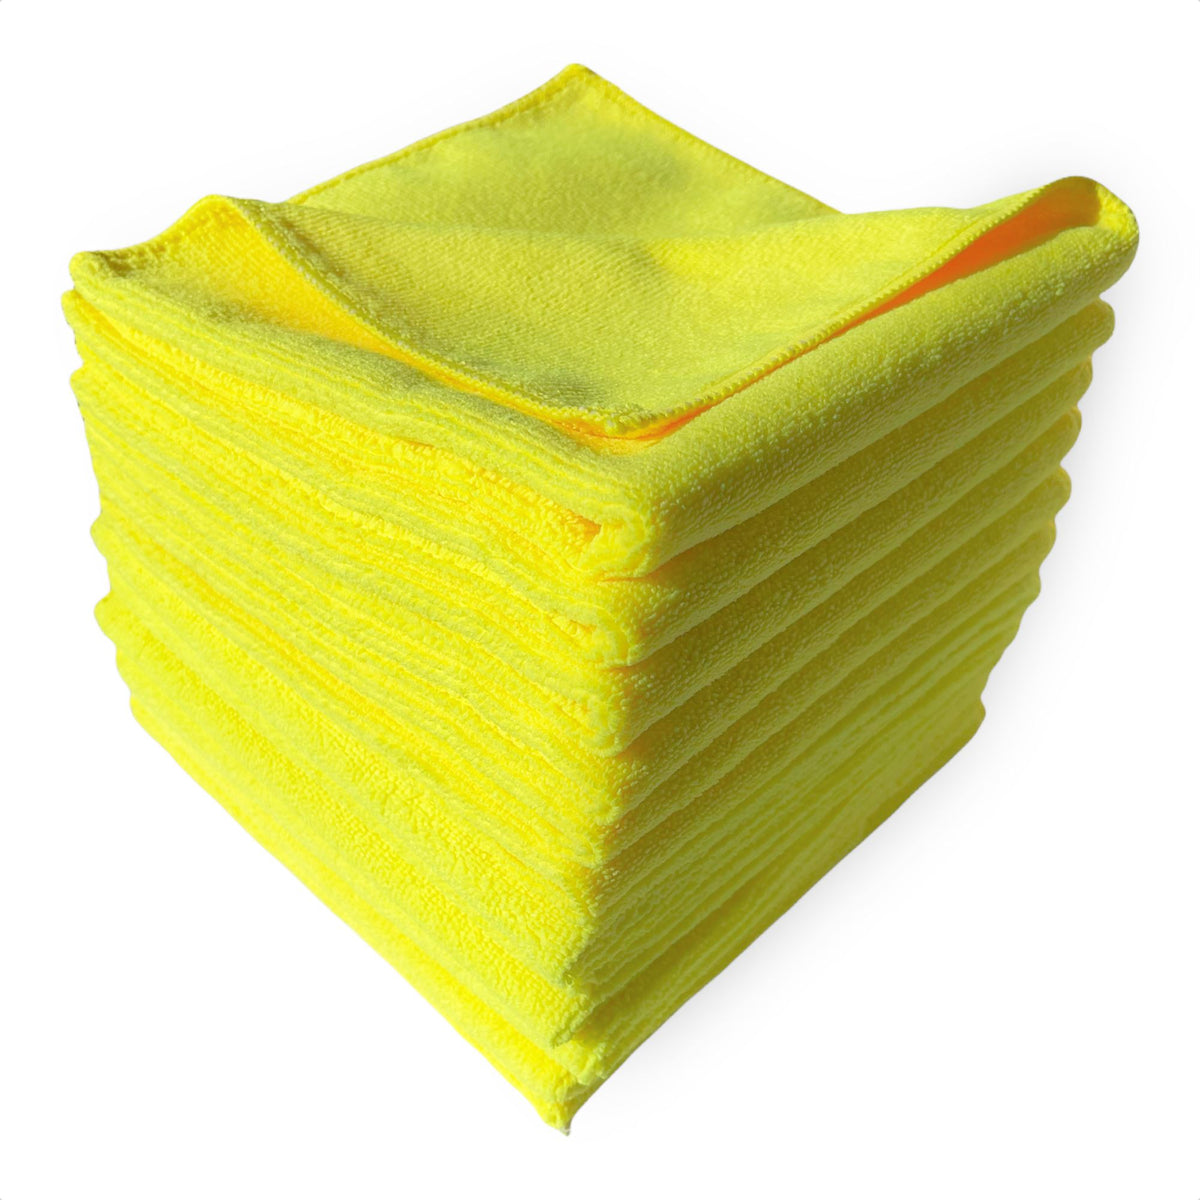 PREMIUM WEIGHT MICROFIBER ALL-PURPOSE CLOTH – The Janitors Supply